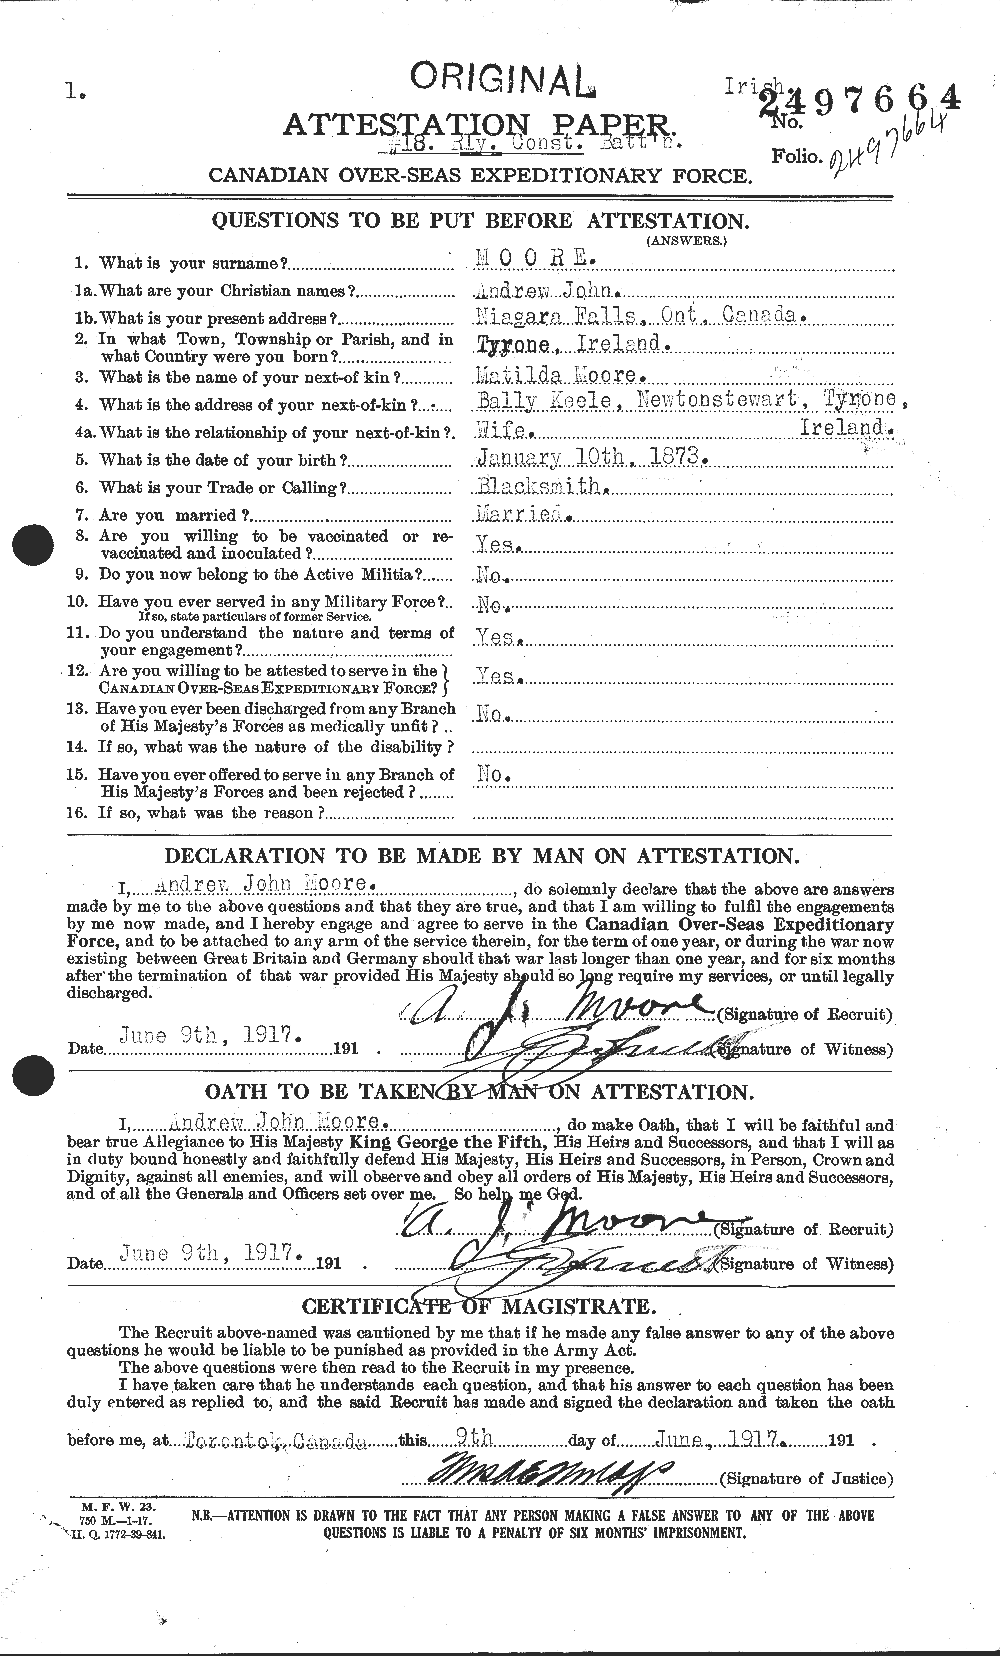 Personnel Records of the First World War - CEF 506410a